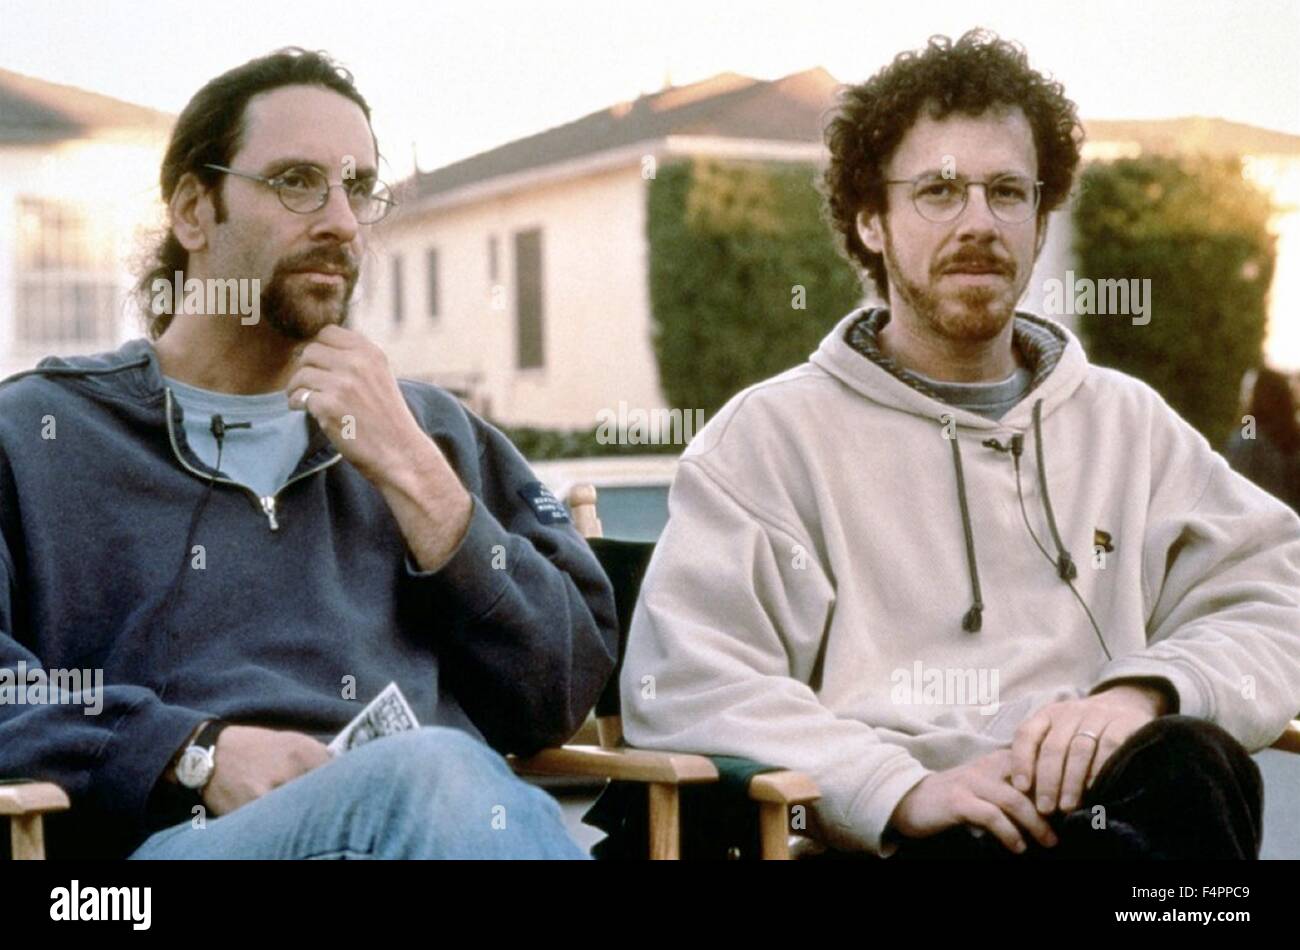 On the set, Joel and Ethan Coen / The Big Lebowski (1998) / 1997 directed by Coen Brothers [Polygram Filmed Entertainment ] Stock Photo